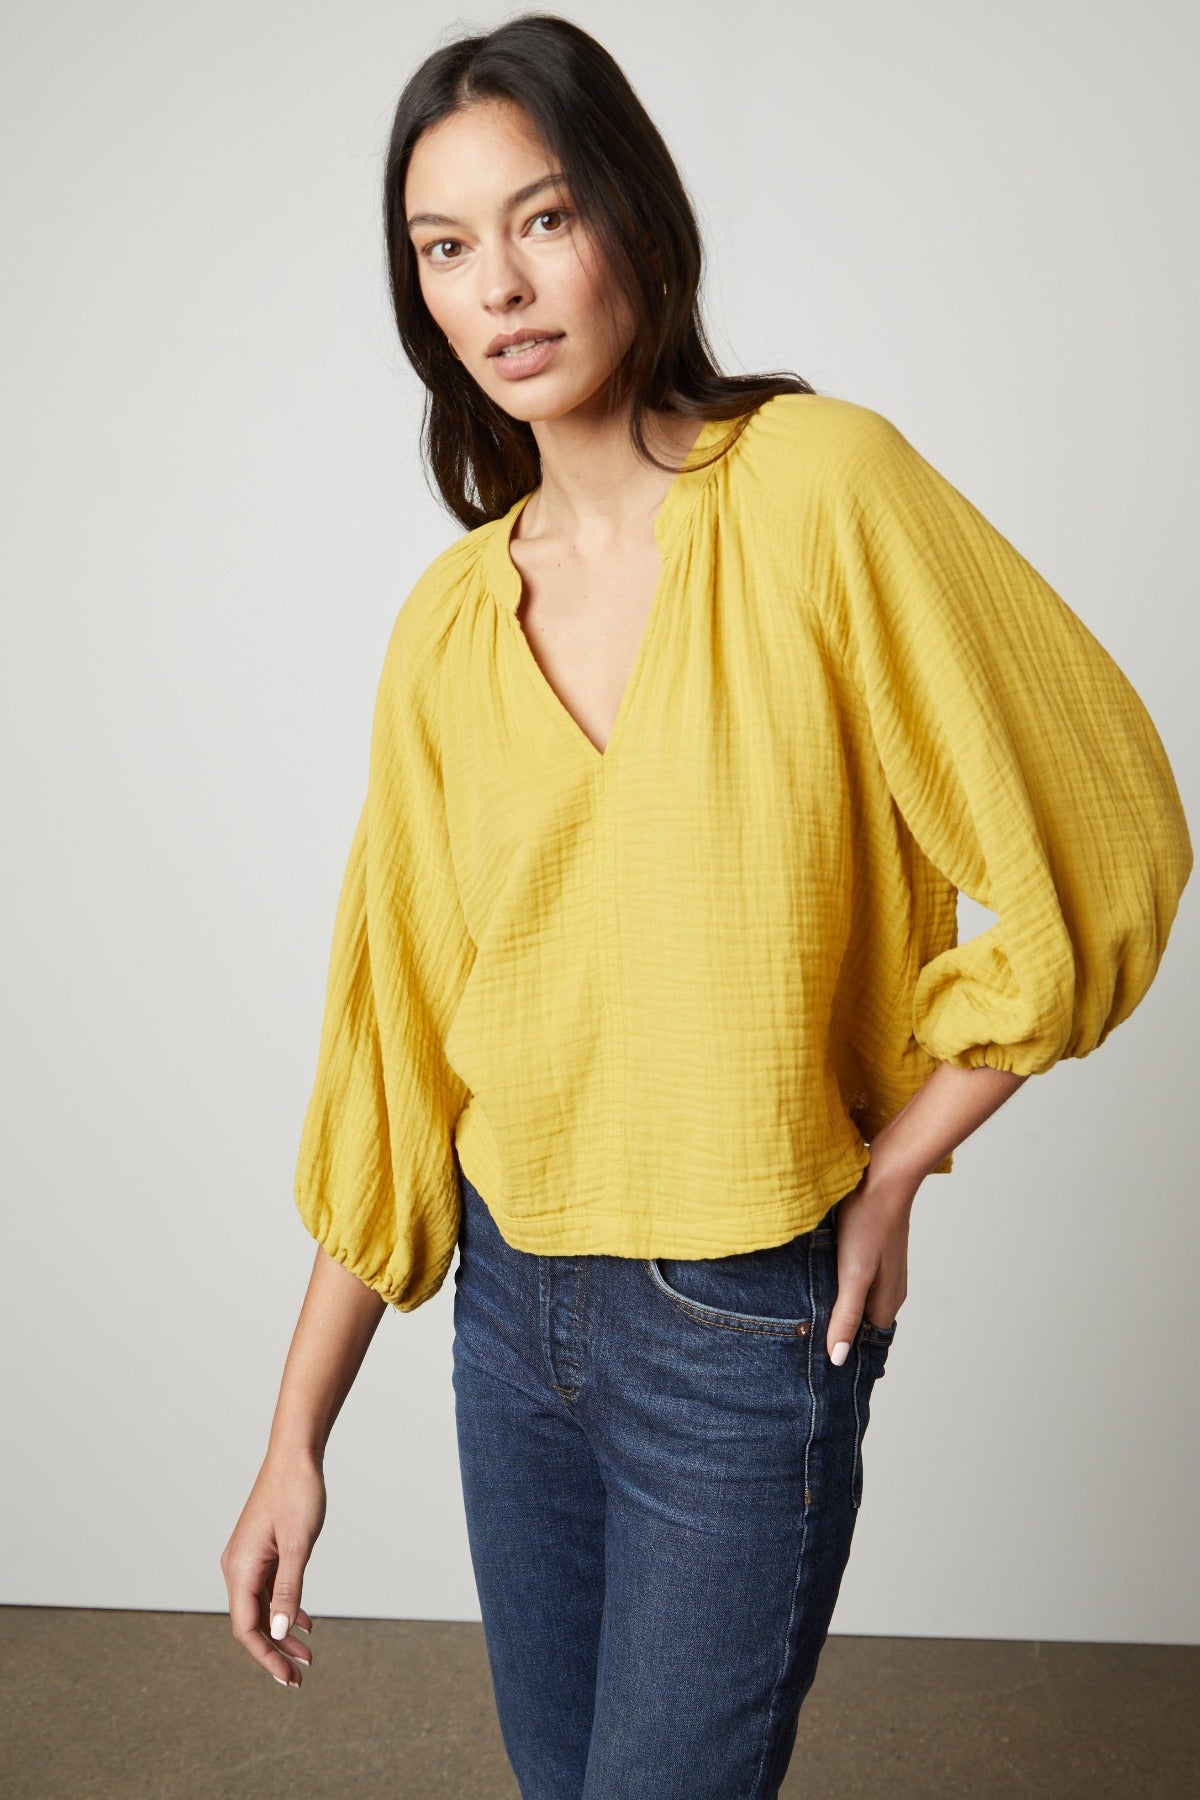 The model is wearing a yellow CARLA COTTON GAUZE TOP with sleeve ruffles by Velvet by Graham & Spencer.-26727052050625